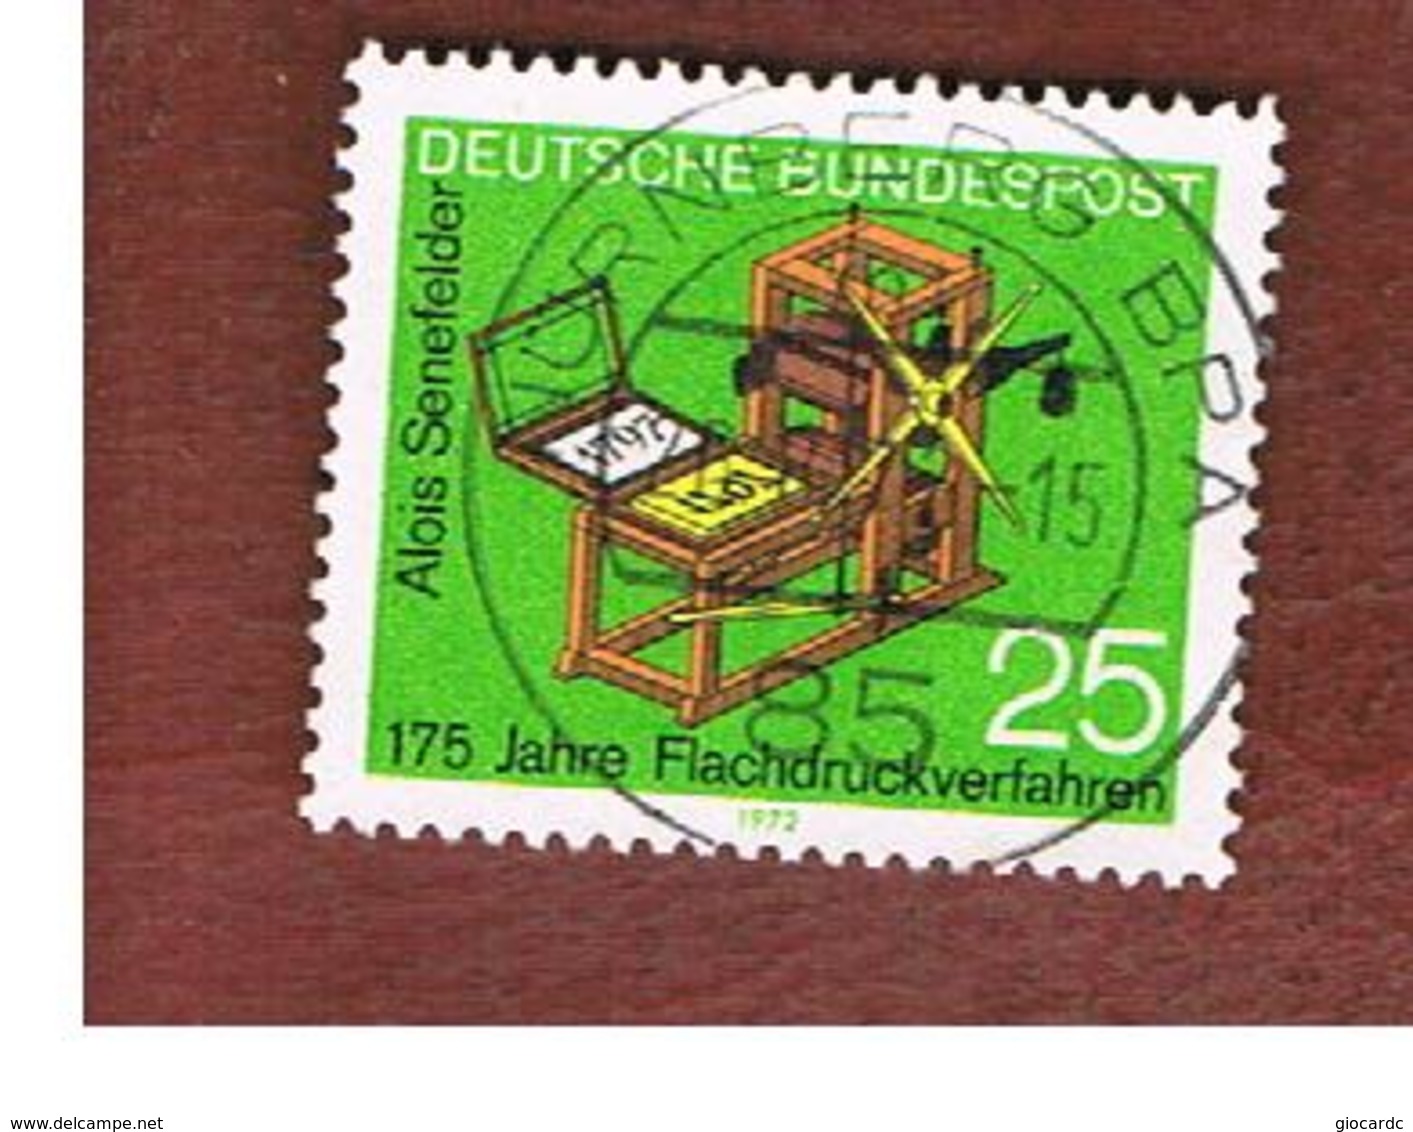 GERMANIA (GERMANY) - SG 1617  - 1972  OFFSET LITHOGRAFHY - USED - Usati